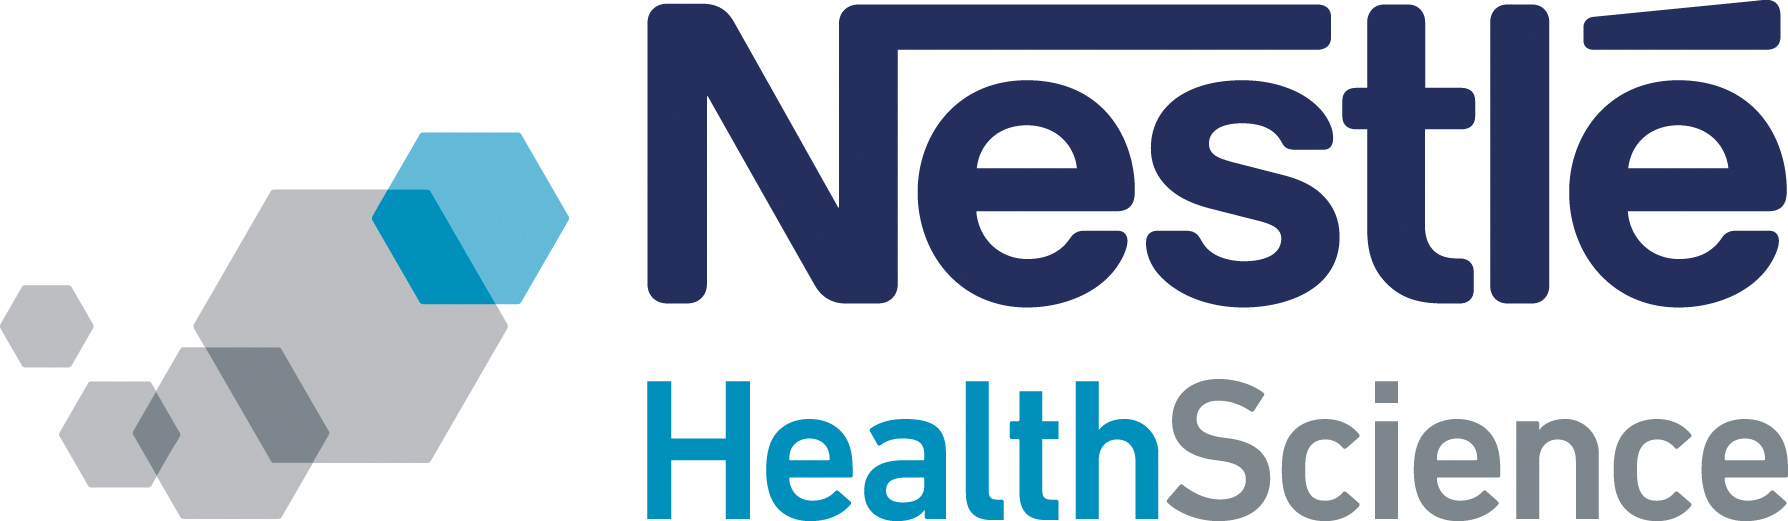 Nestlé Health Science, a wholly-owned subsidiary of Nestlé, is a health-science company engaged in advancing the role of nutrition therapy to change the course of health for consumers, patients and its partners in healthcare. Nestlé Health Science’s portfolio of nutrition solutions, diagnostics, devices and drugs targets a number of health areas, such as inborn errors of metabolism, pediatric and acute care, obesity care, healthy aging, and gastrointestinal and brain health. Through investing in innovation and leveraging leading edge science, Nestlé Health Science brings forward innovative nutritional therapies with clinical, health economic value and quality of life benefits. Nestlé Health Science employs around 3,000 people worldwide and is headquartered in Epalinges (near Lausanne), Switzerland. For more information, please visit http://www.nestlehealthscience.com.